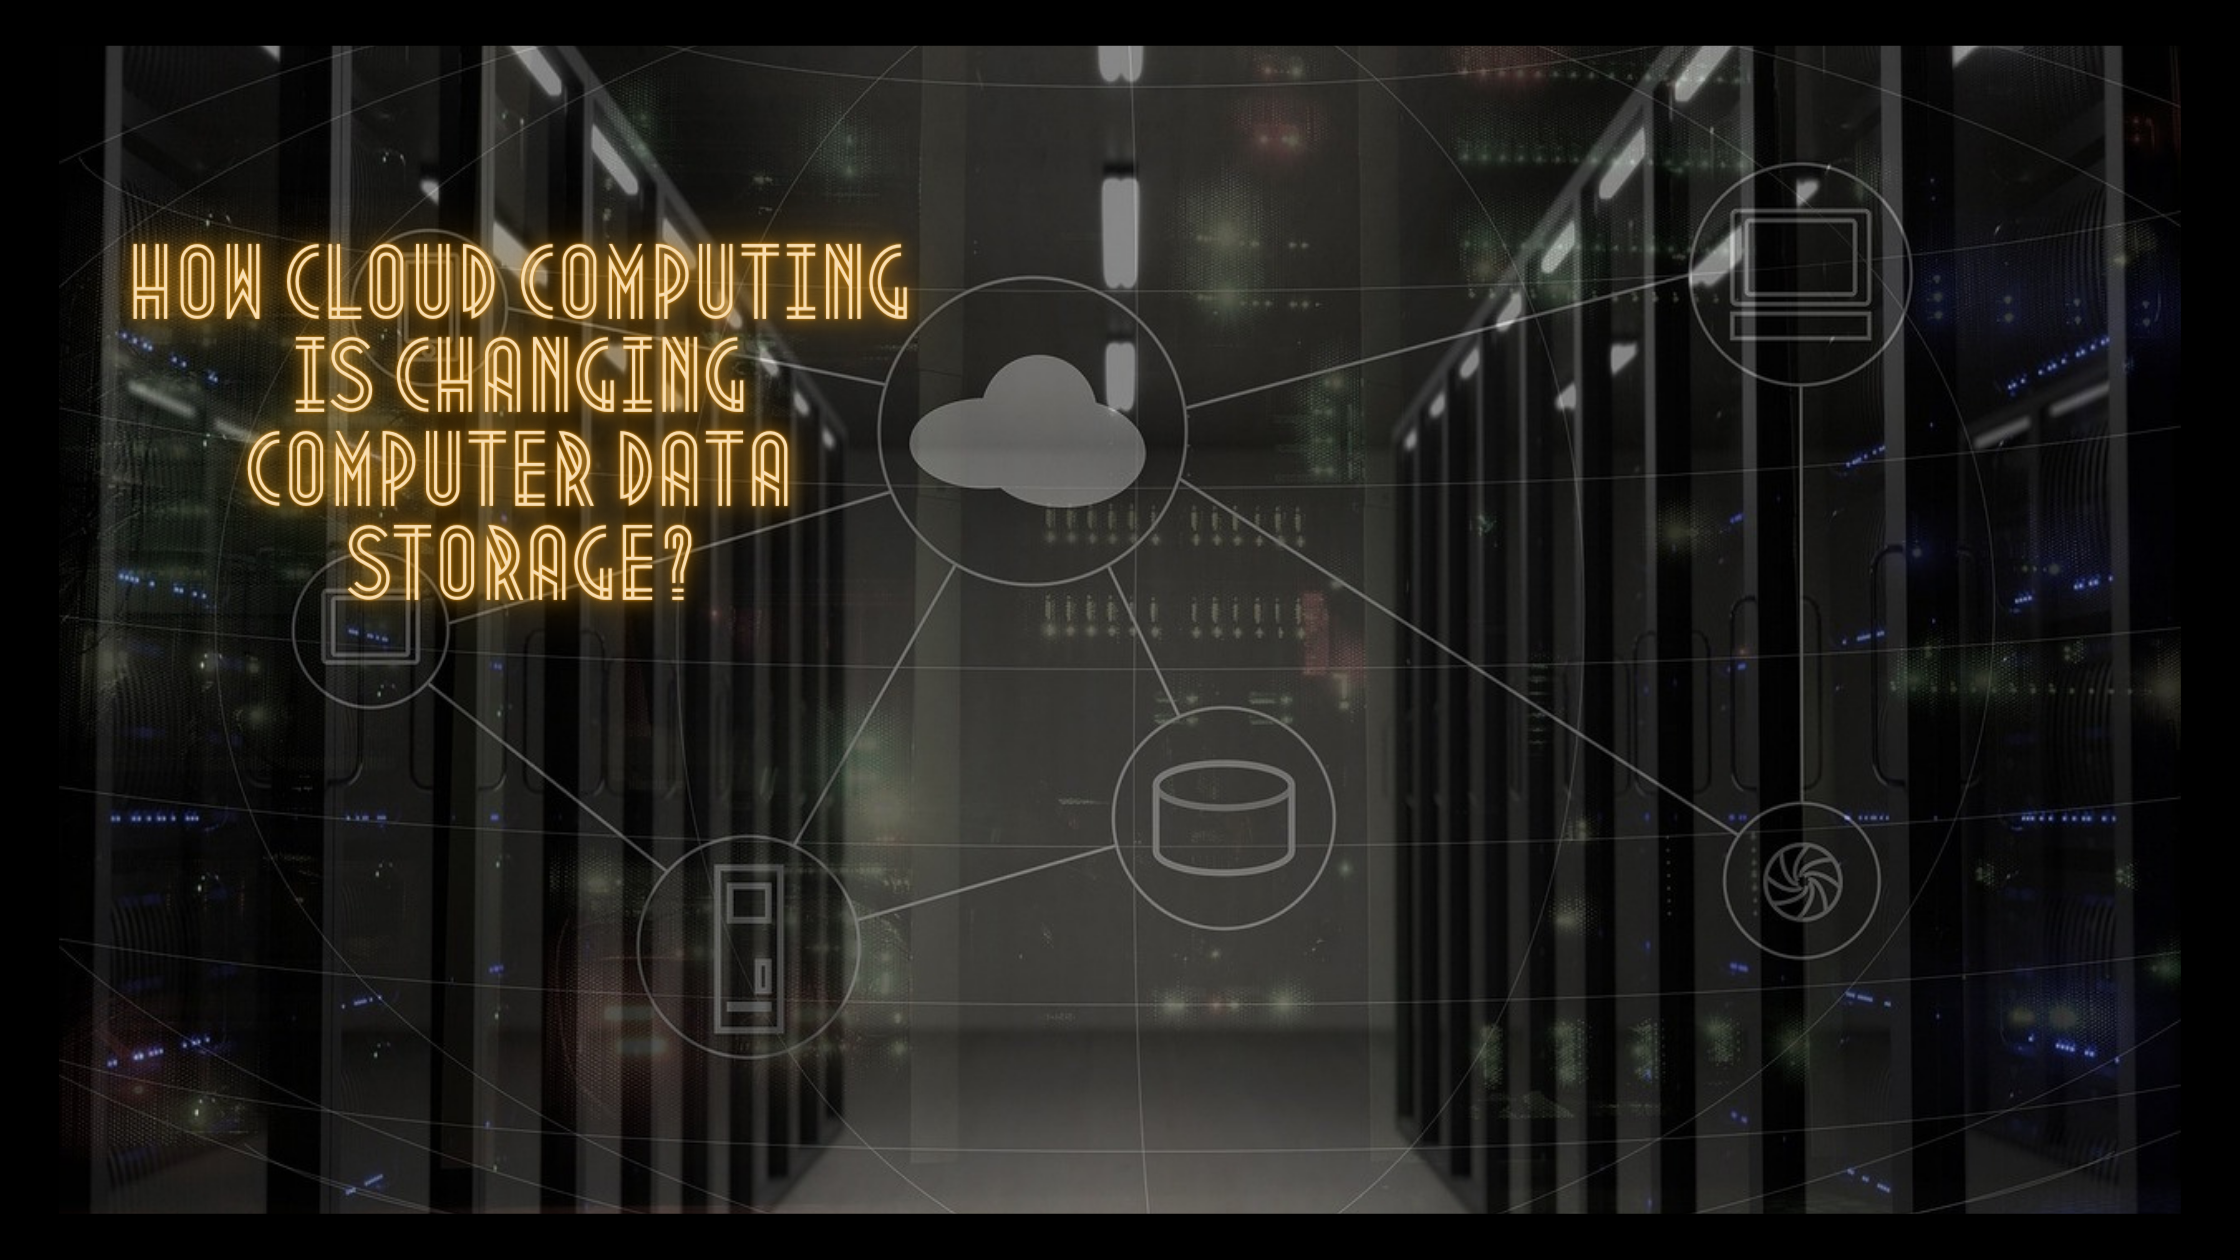 How Cloud Computing is changing computer data storage?